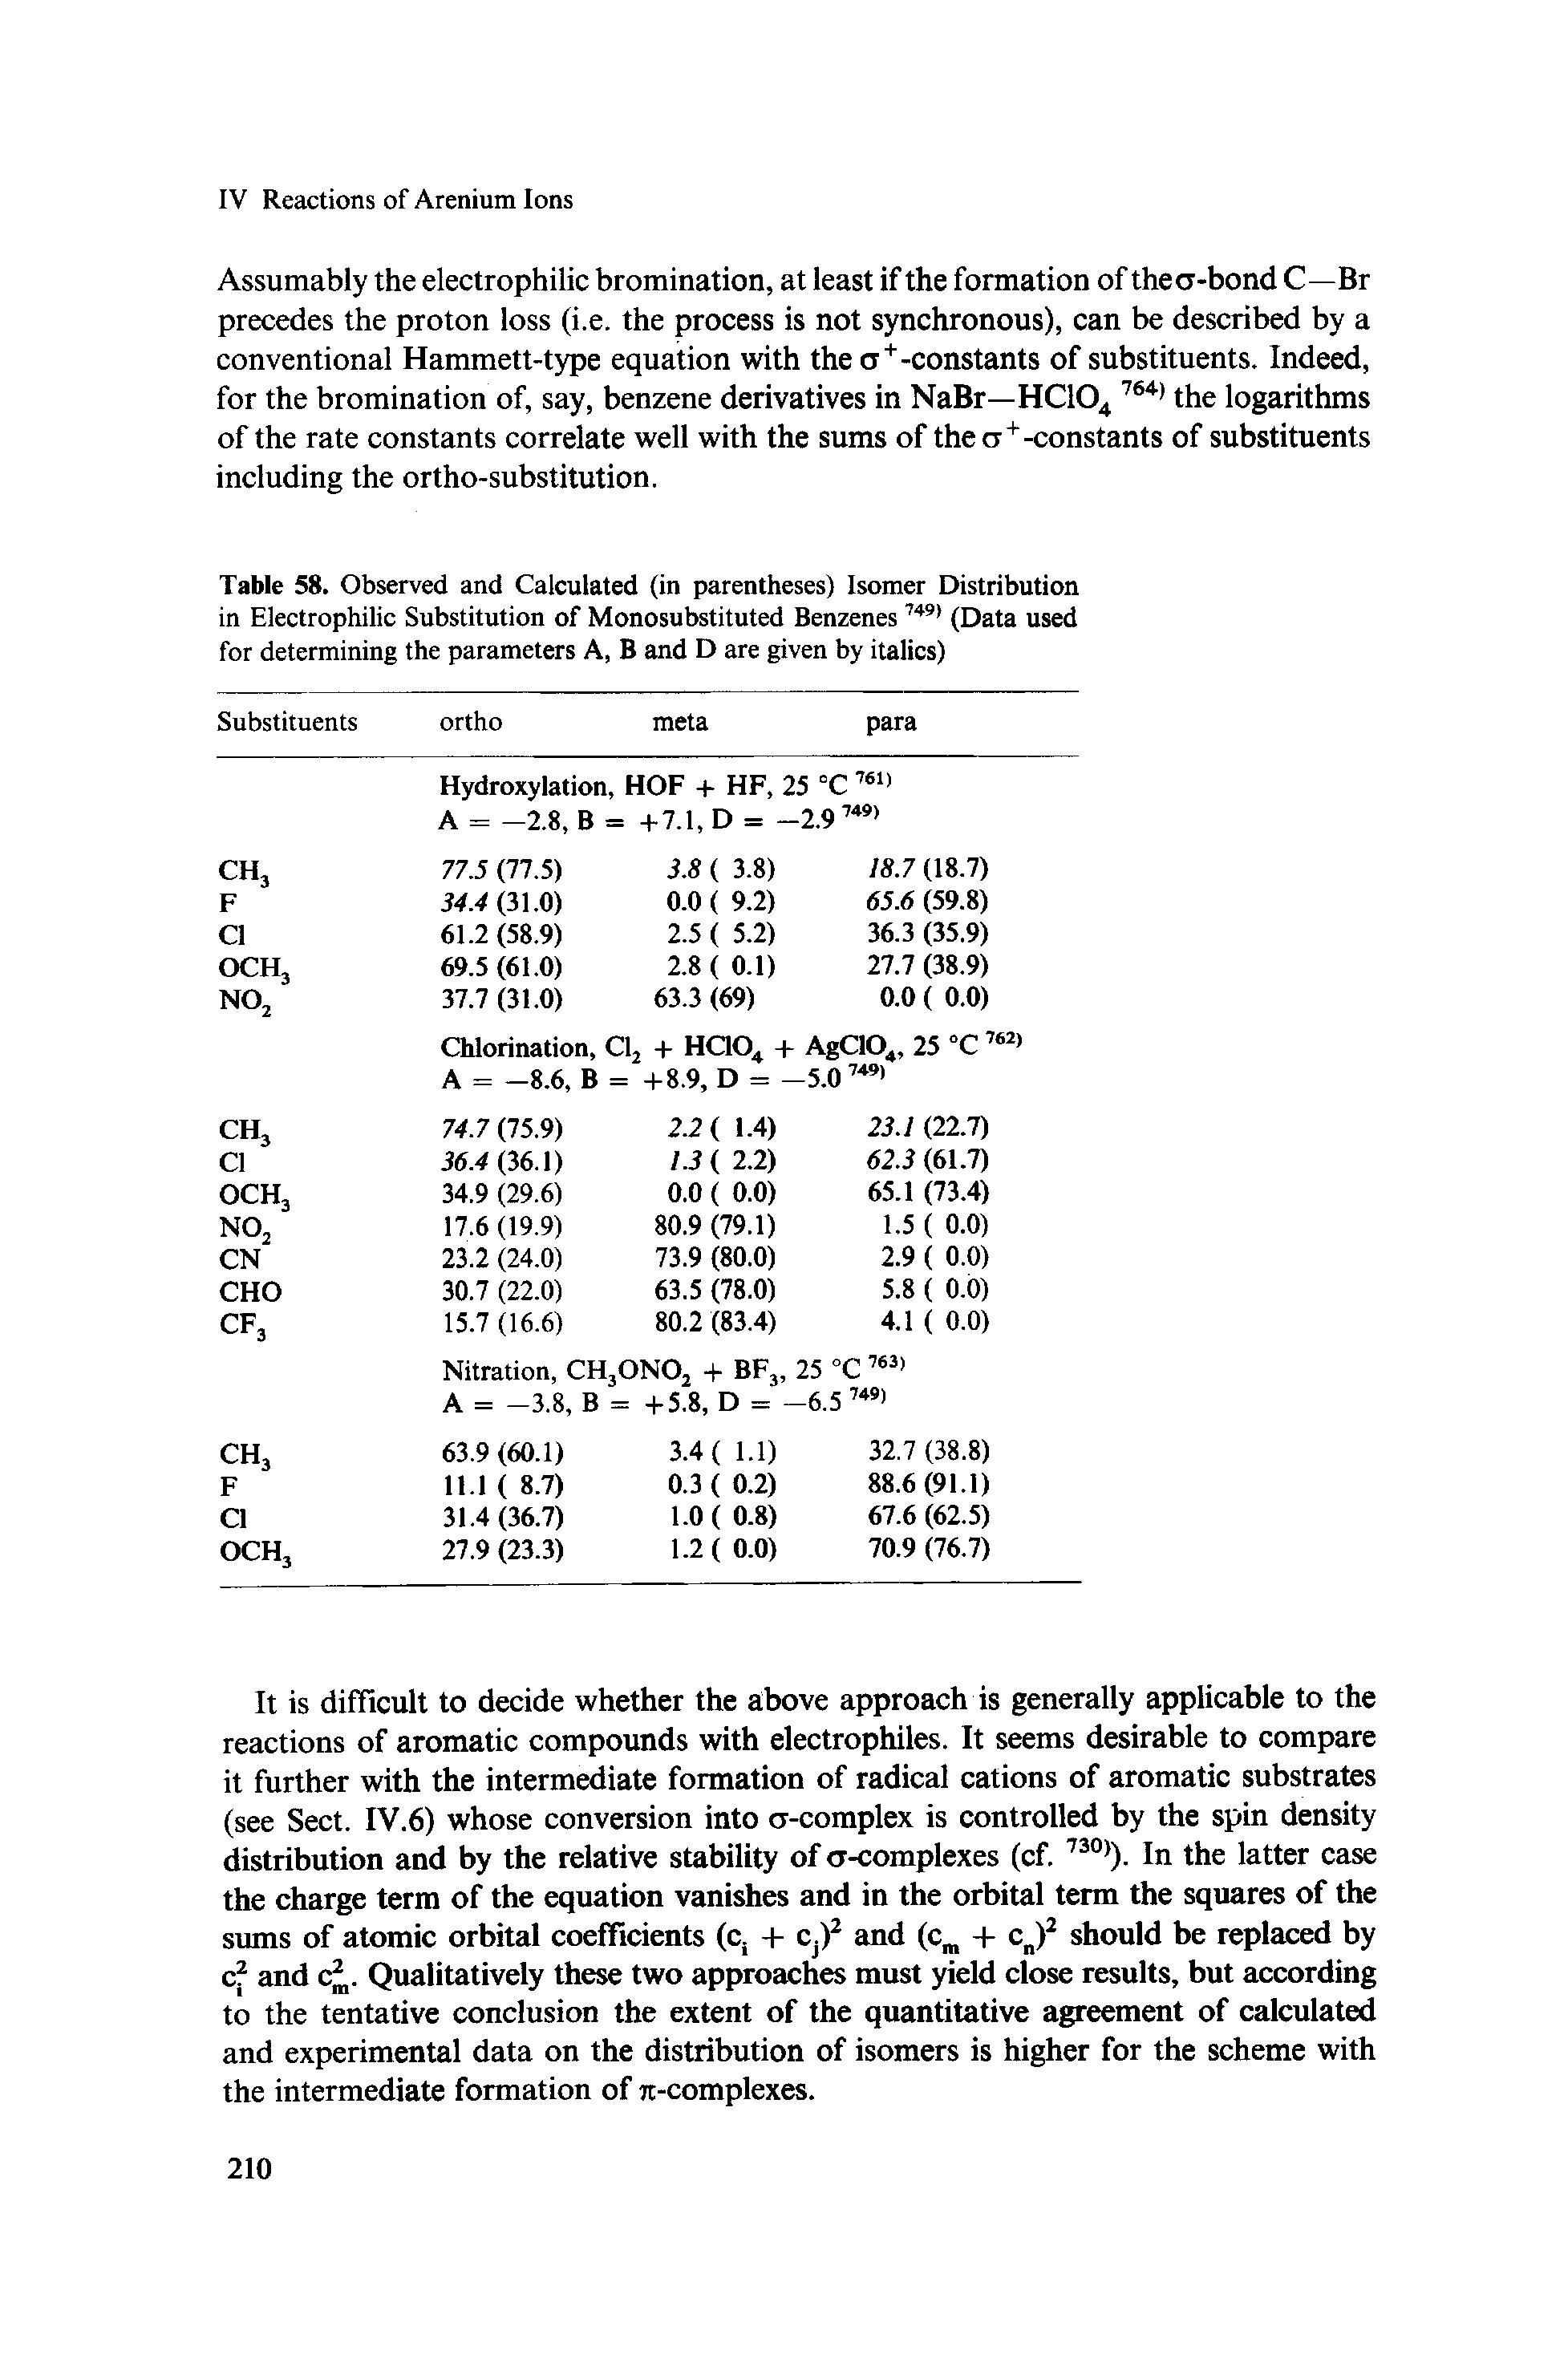 Table 58. Observed and Calculated (in parentheses) Isomer Distribution in Electrophilic Substitution of Monosubstituted Benzenes (Data used for determining the parameters A, B and D are given by italics)...